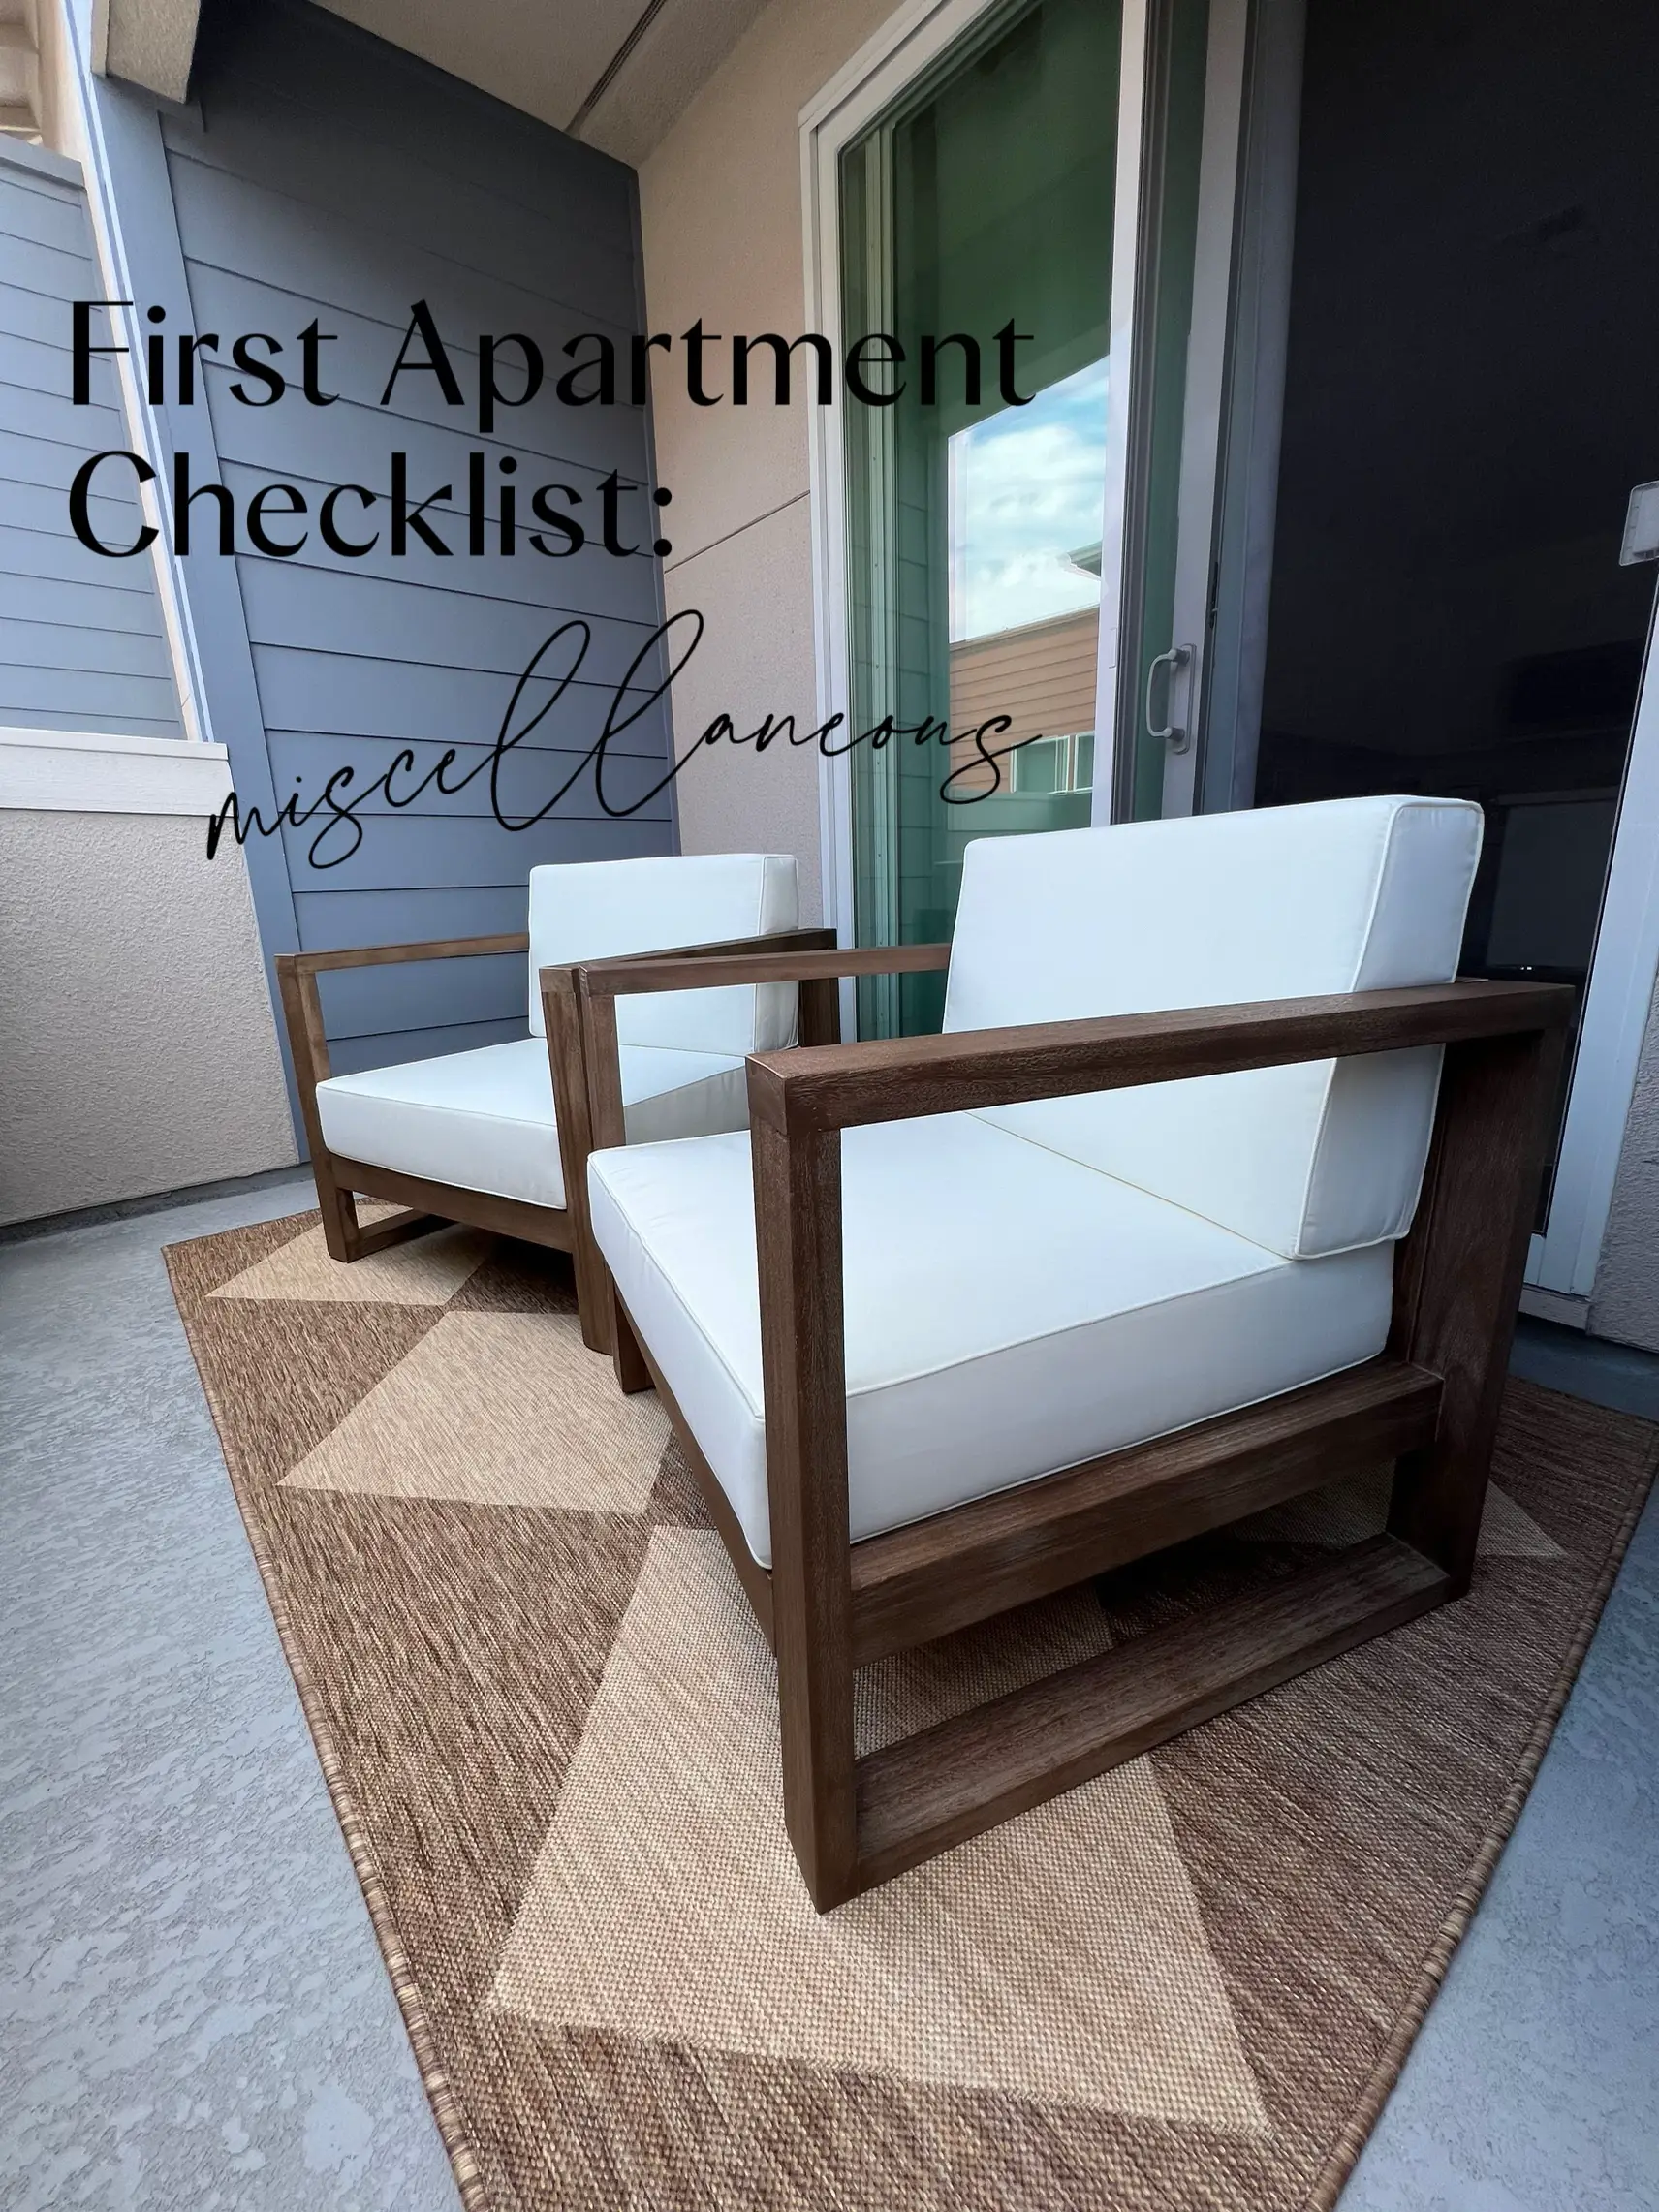 6/14) First Apartment Checklist: Appliances, Gallery posted by Carissa  Nicole